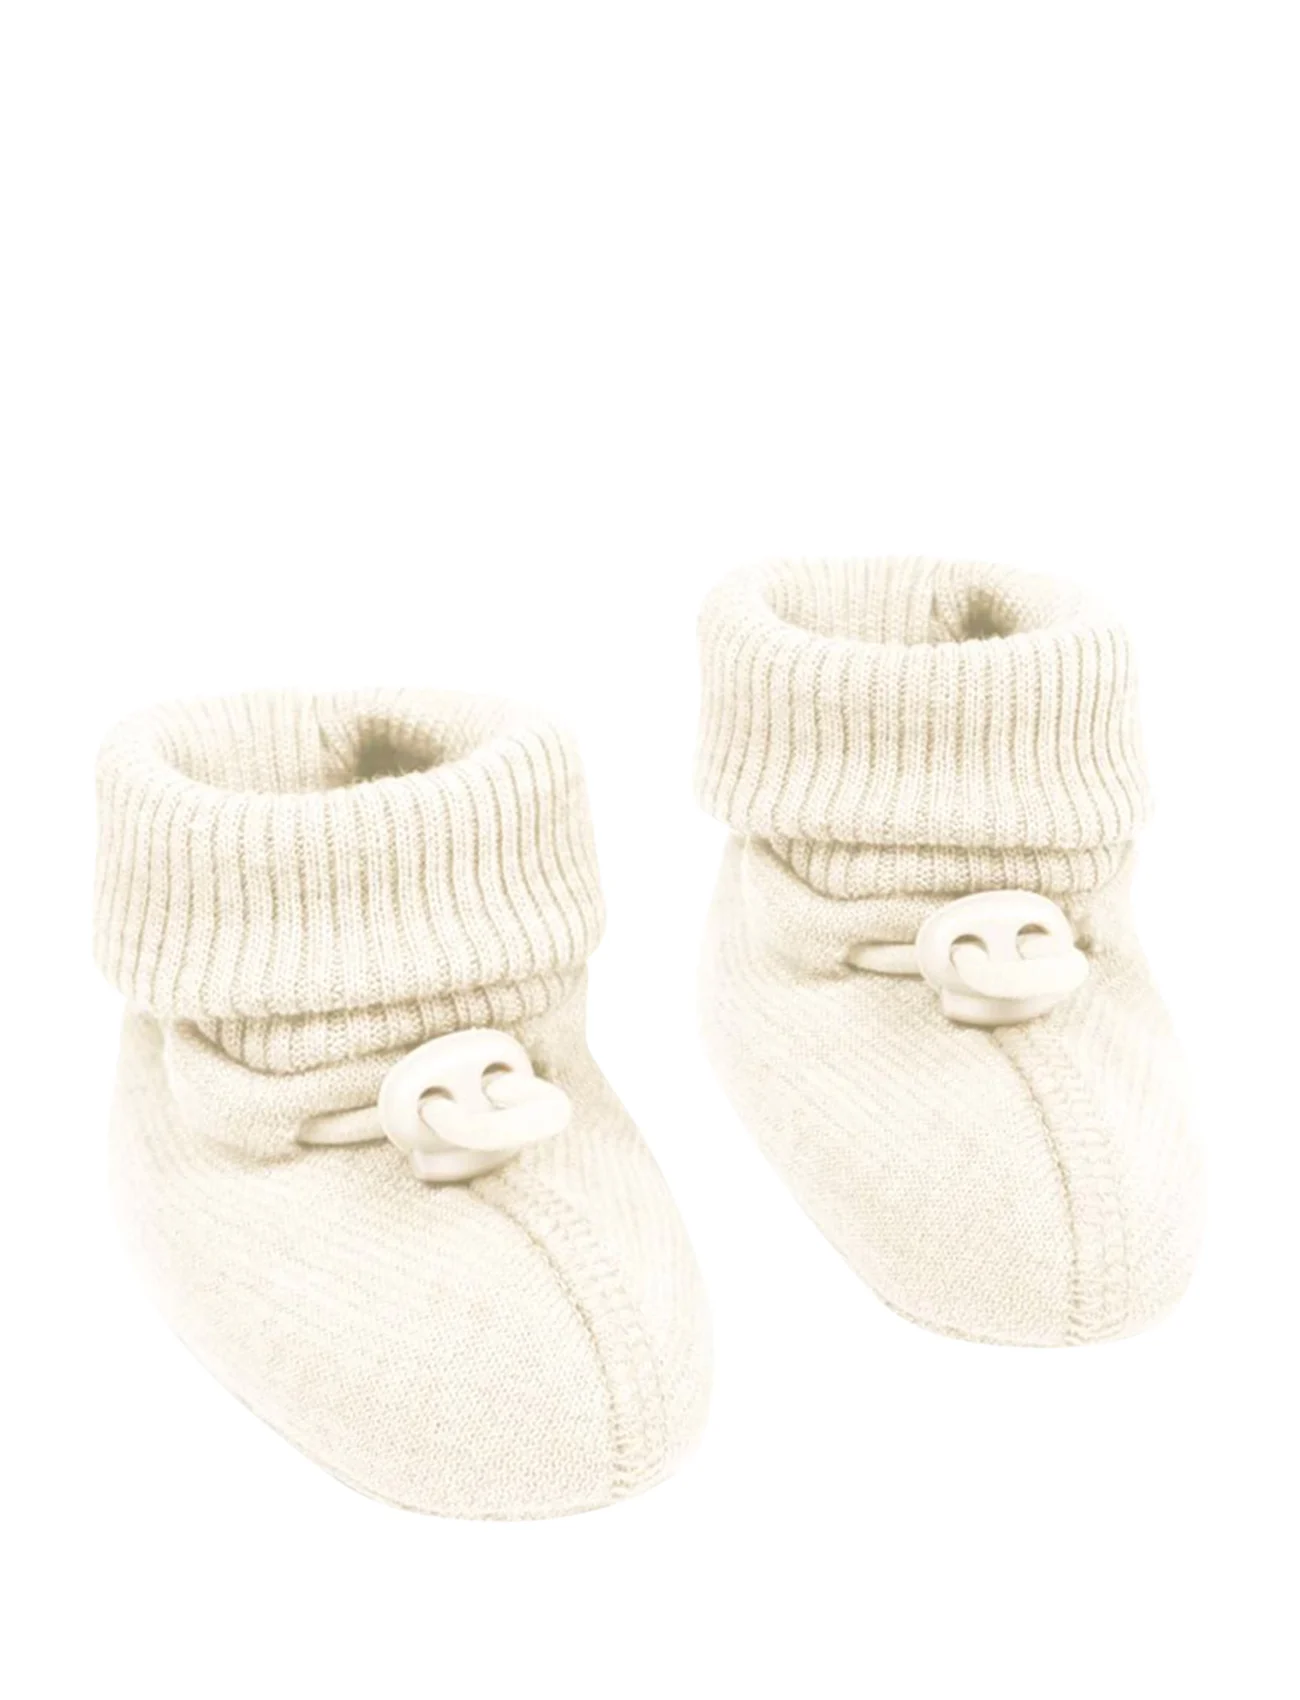 Smallstuff - Booties, merino wool, offwhite - shop by age - offwhite - 0